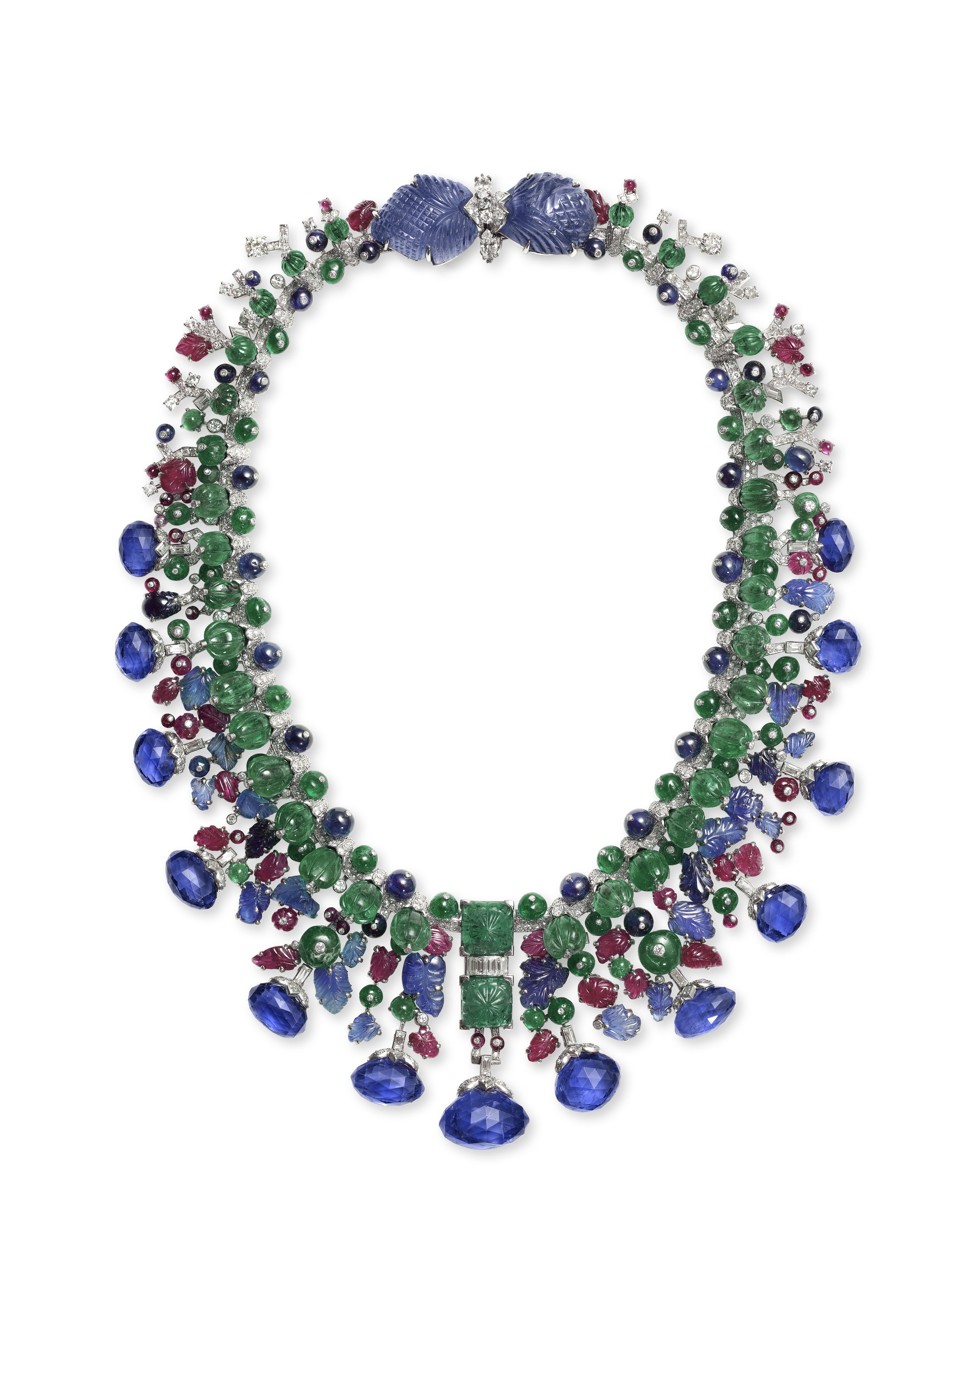 Tutti frutti necklace commissioned by Singer heiress Daisy Fellowes, now part of the Cartier Collection.